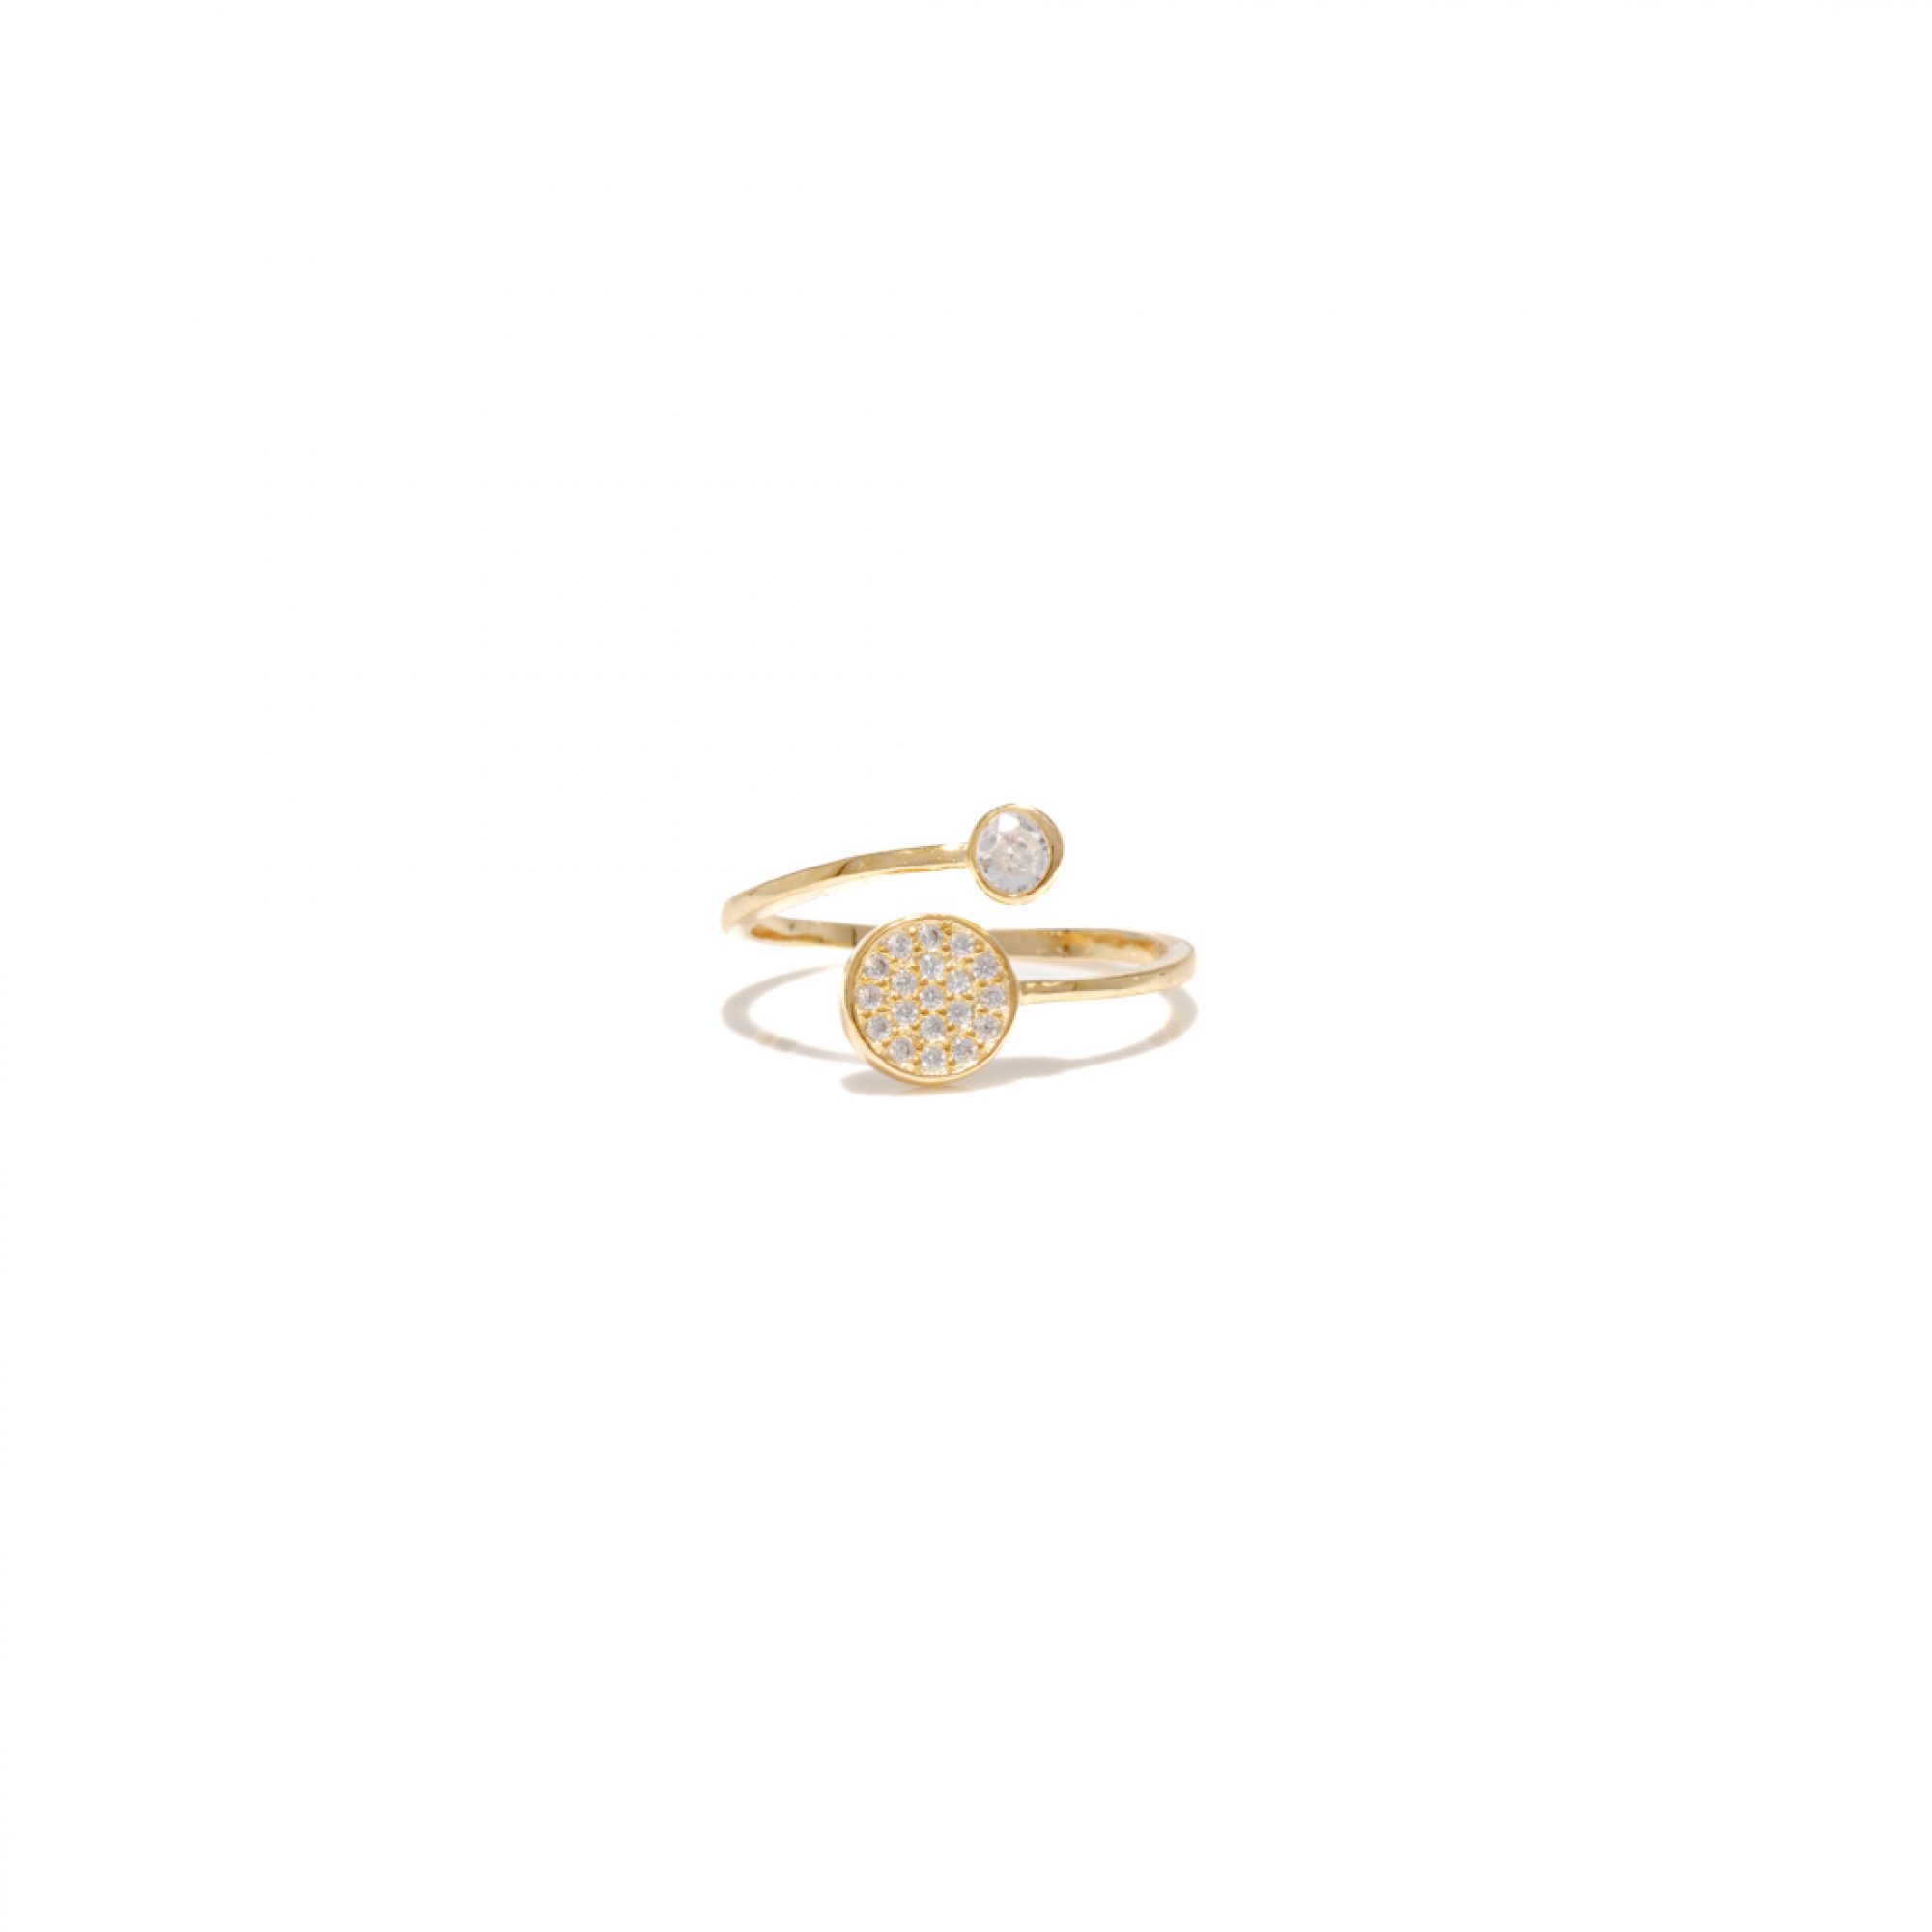 Gold plated ring with natural zircon stones